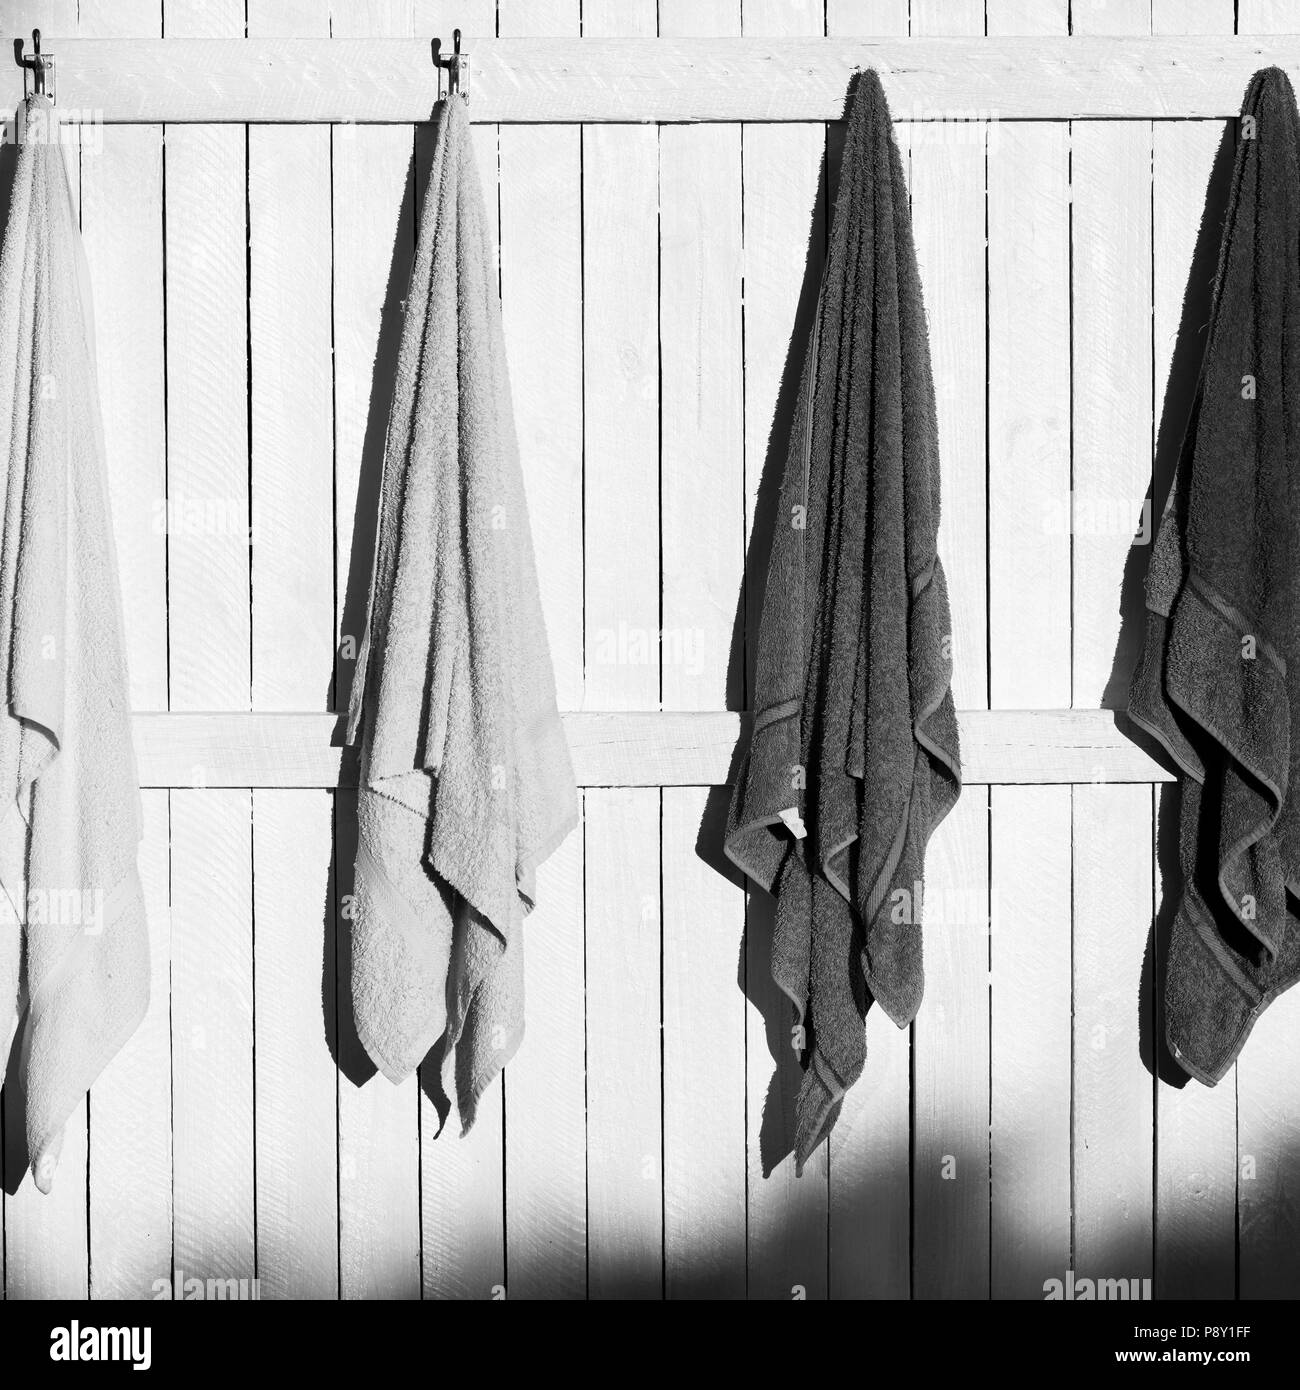 Towels hanging outdoors on hooks in the sun in black and white Stock Photo